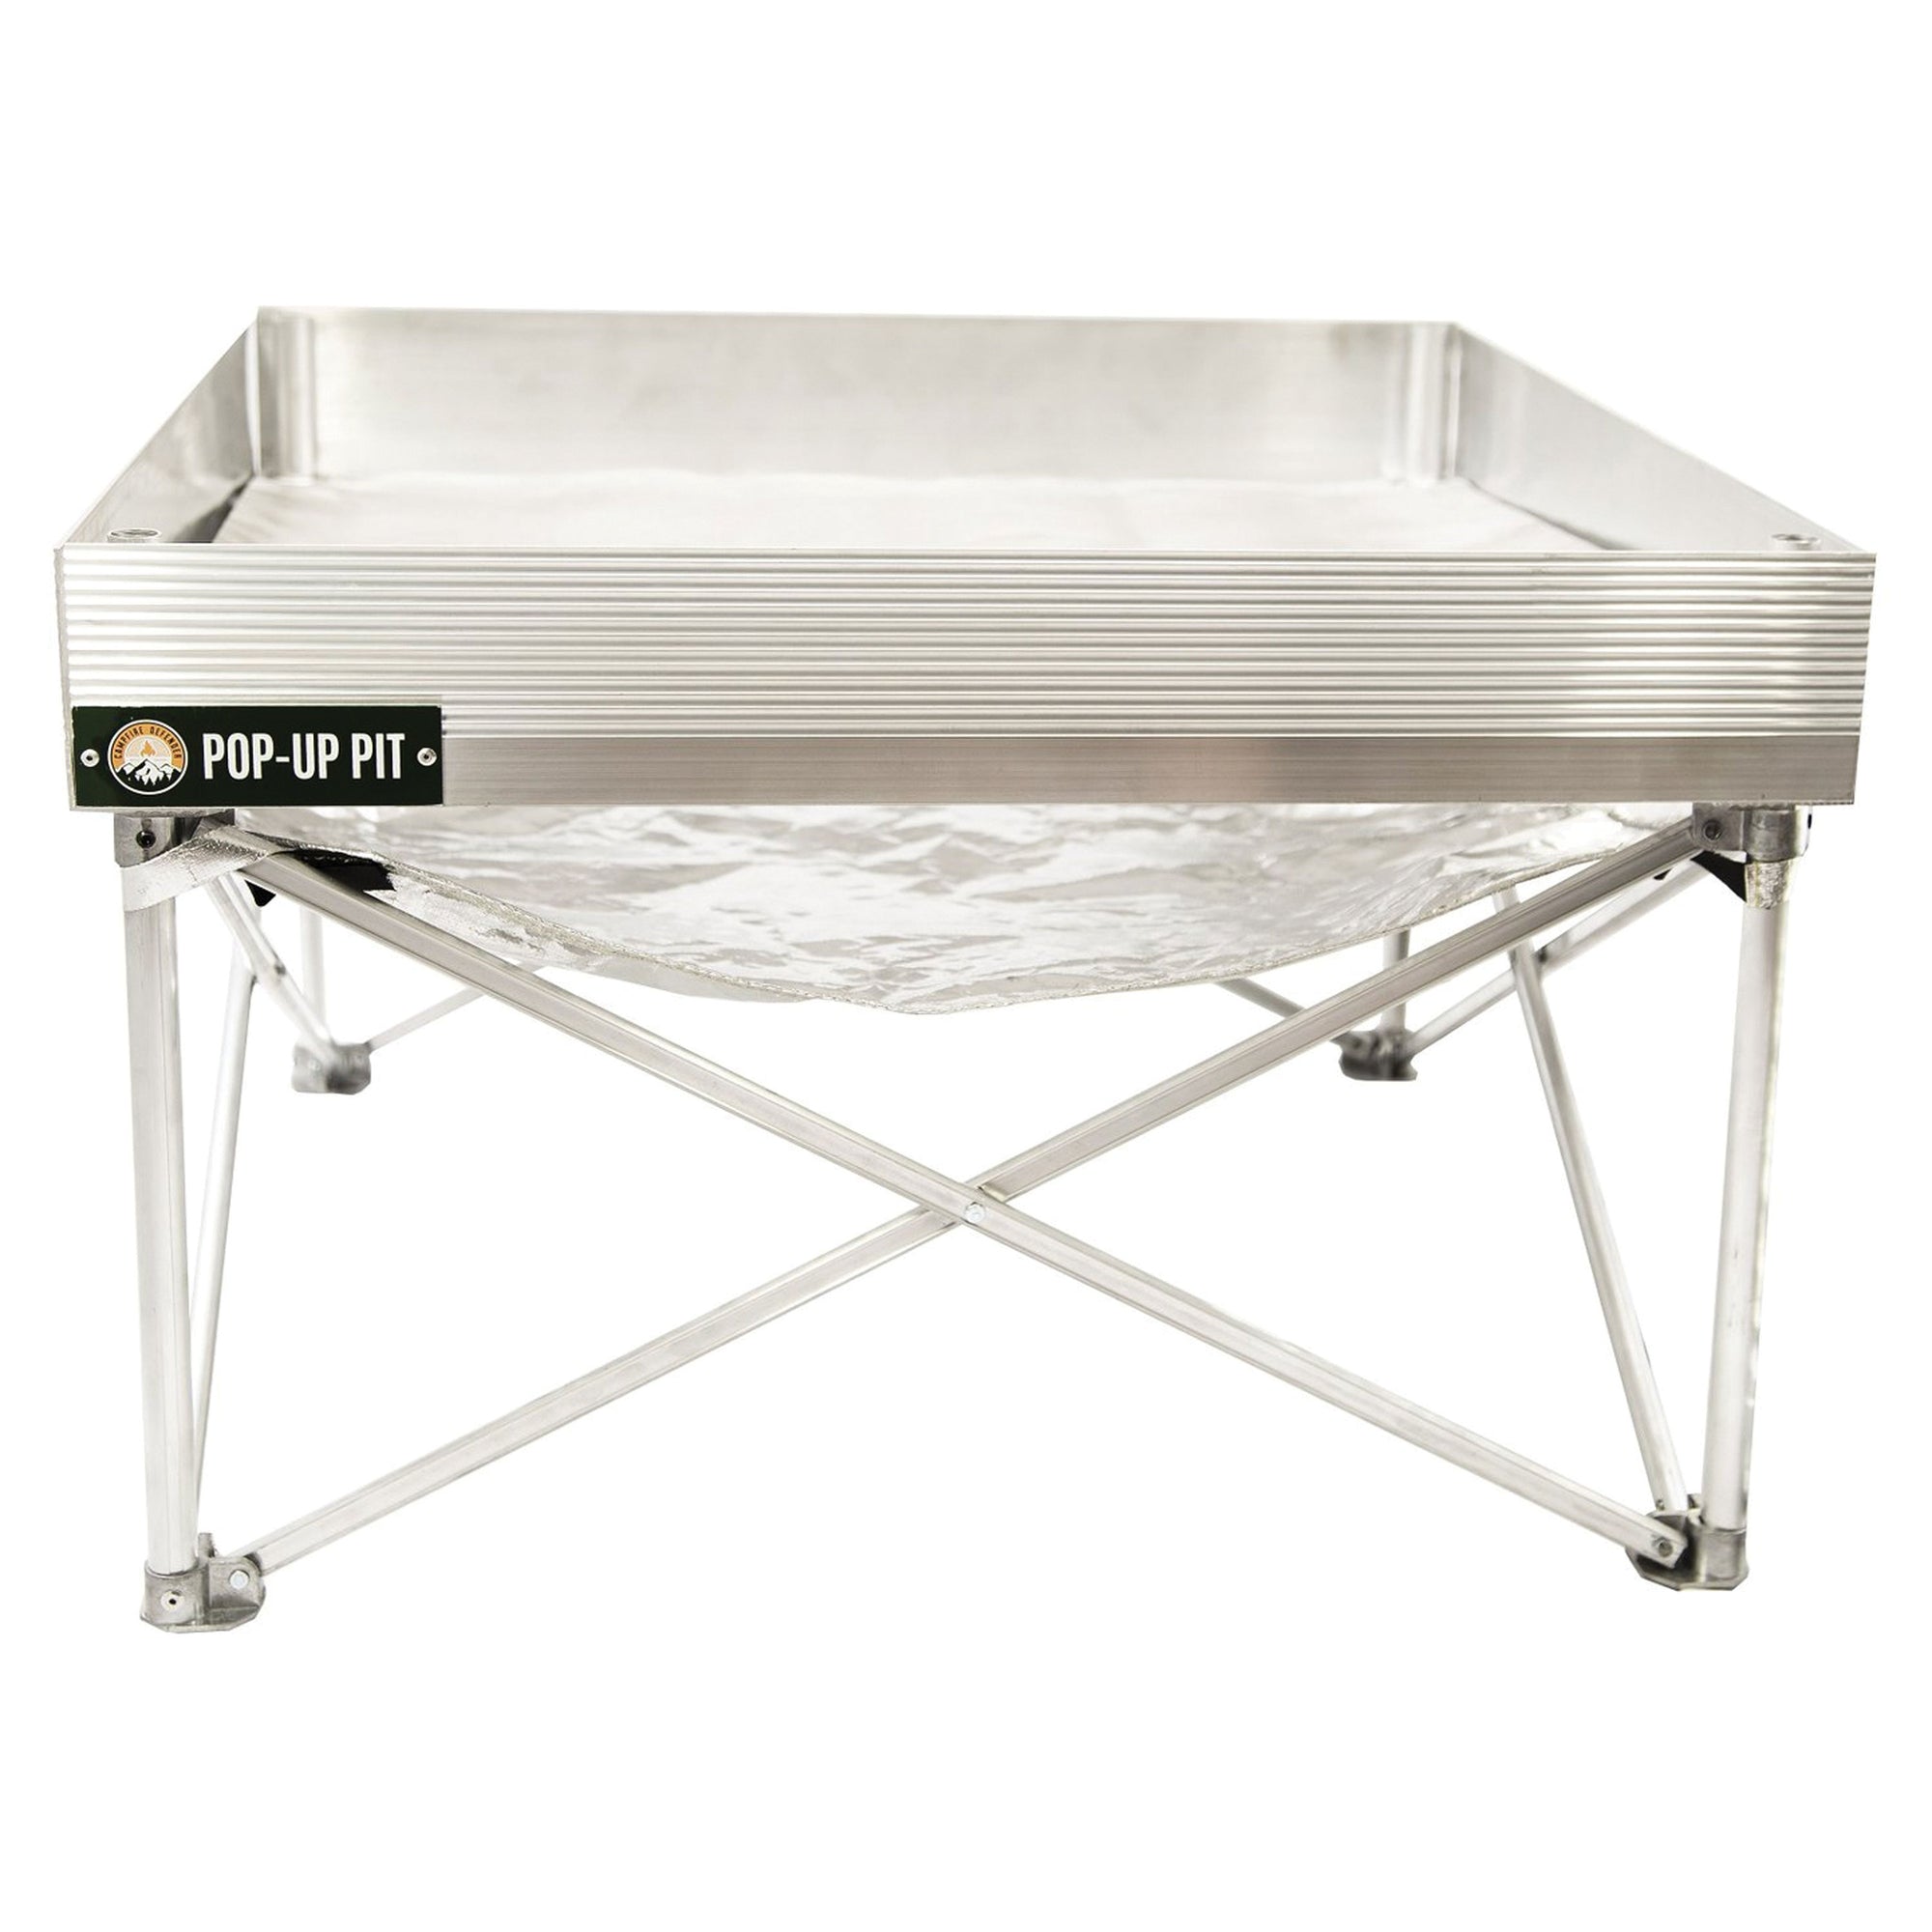 Fireside Outdoor CB001 Pop-Up Pit with Heat Shield